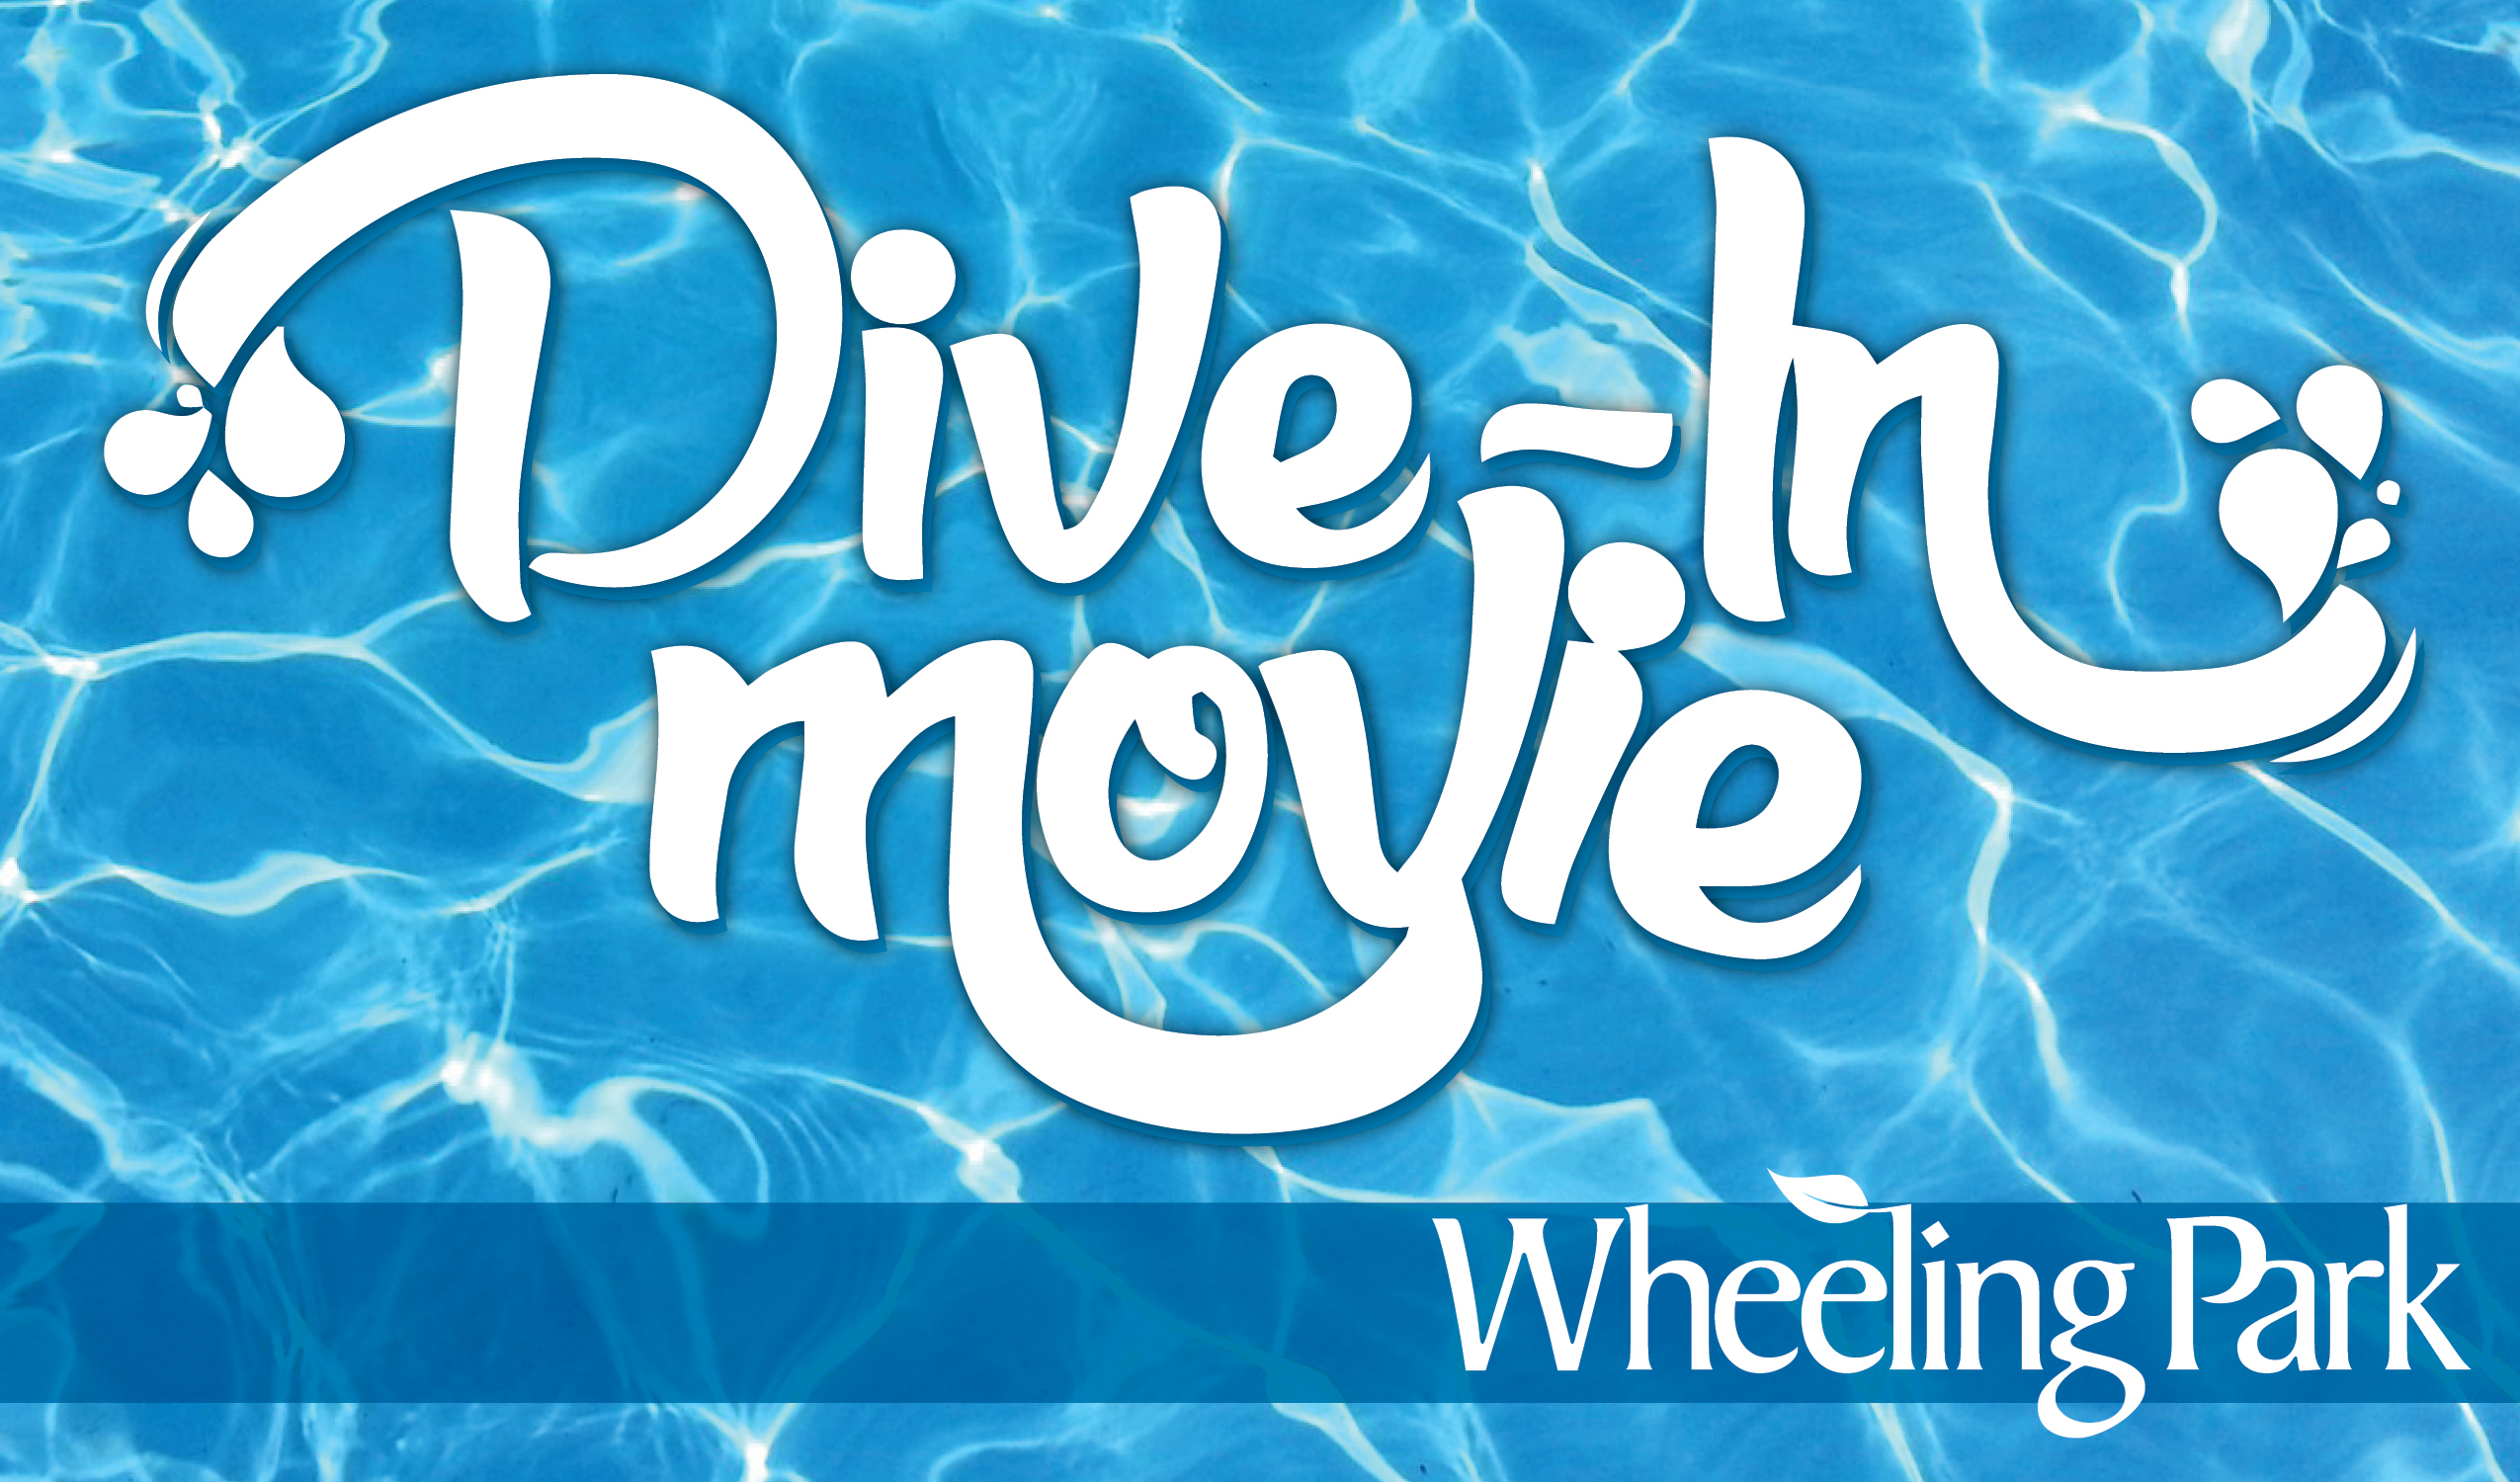 Wheeling Park Summer Dive In Movies photo